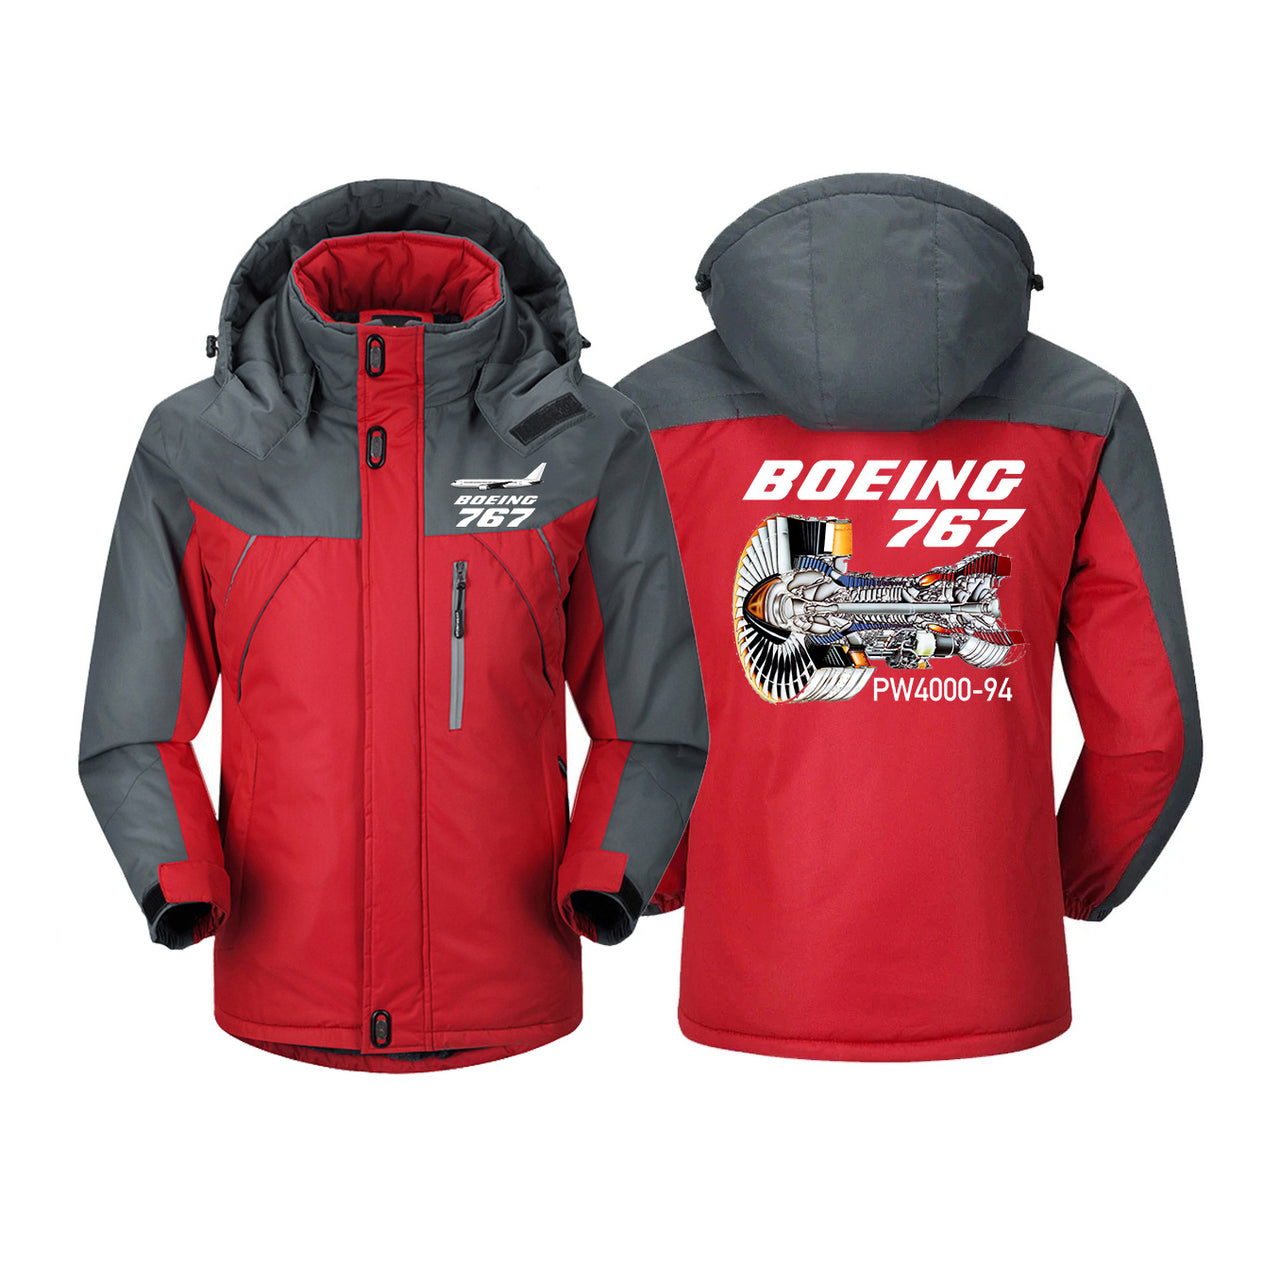 Boeing 767 Engine (PW4000-94) Designed Thick Winter Jackets